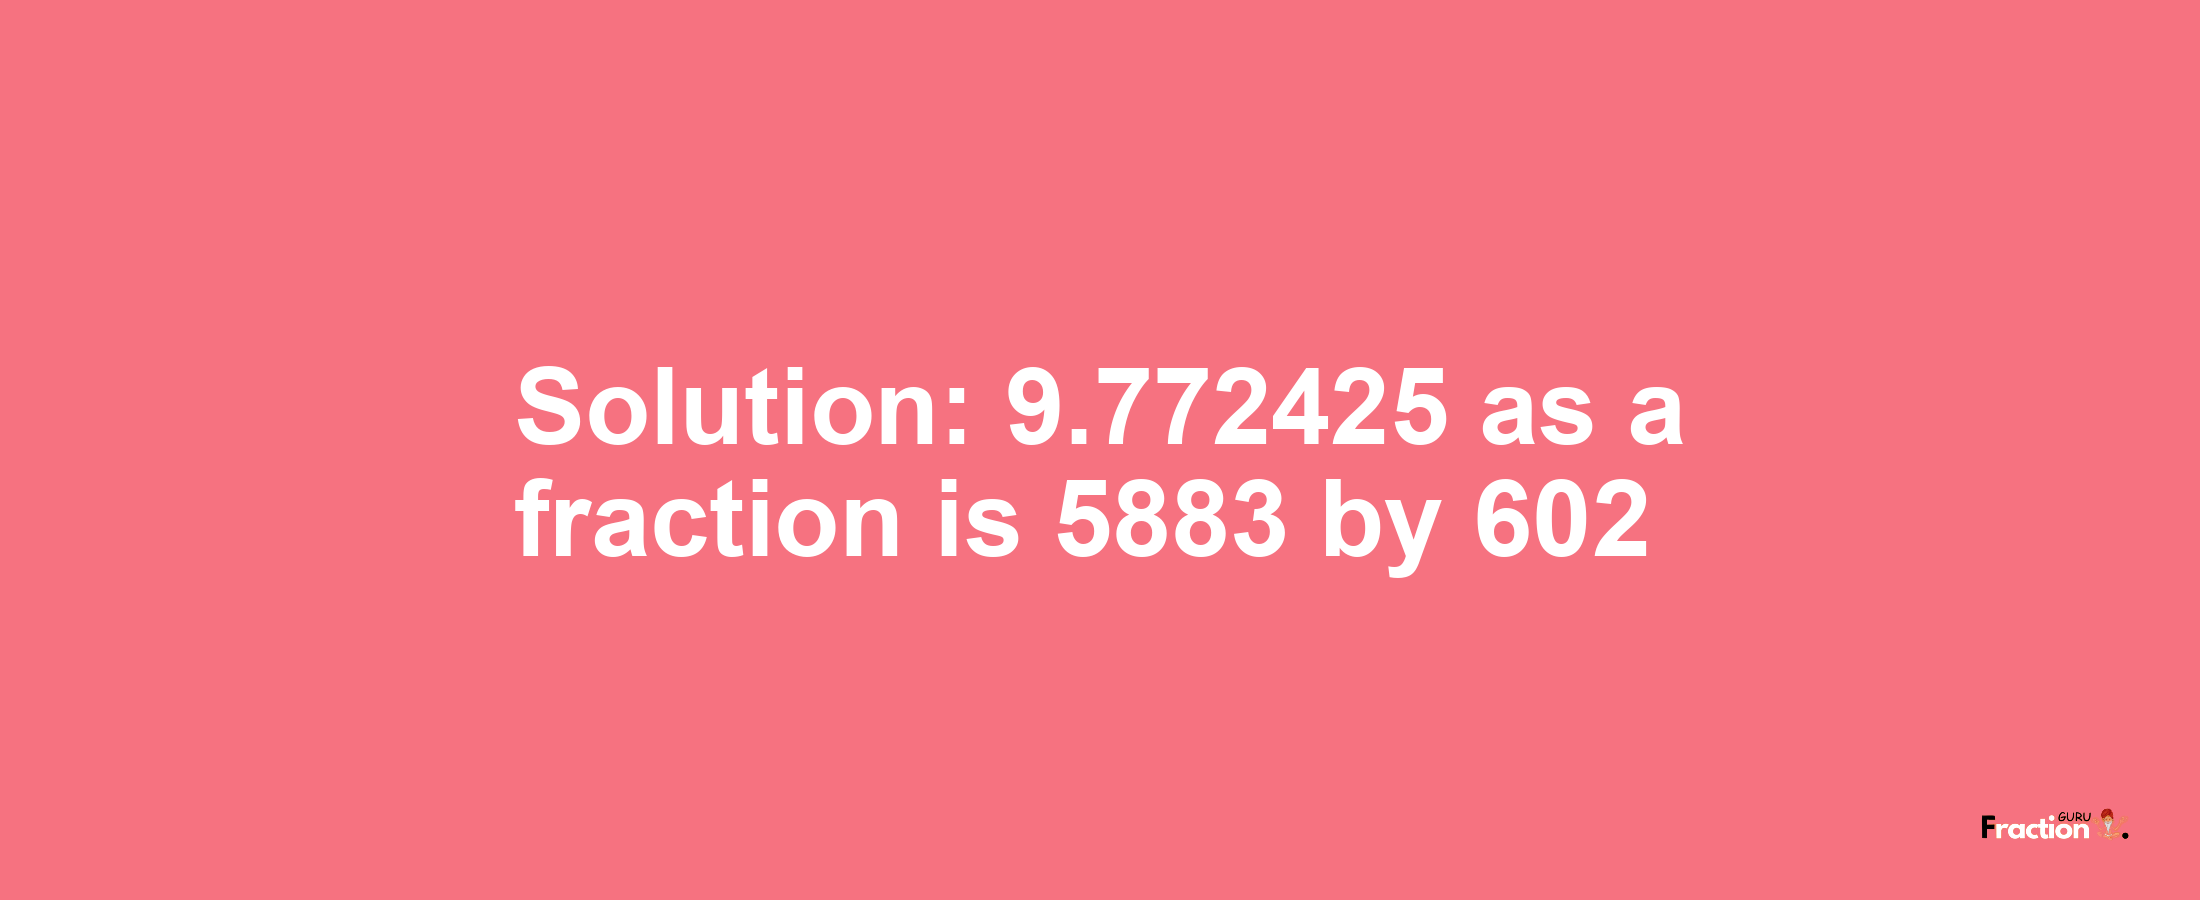 Solution:9.772425 as a fraction is 5883/602